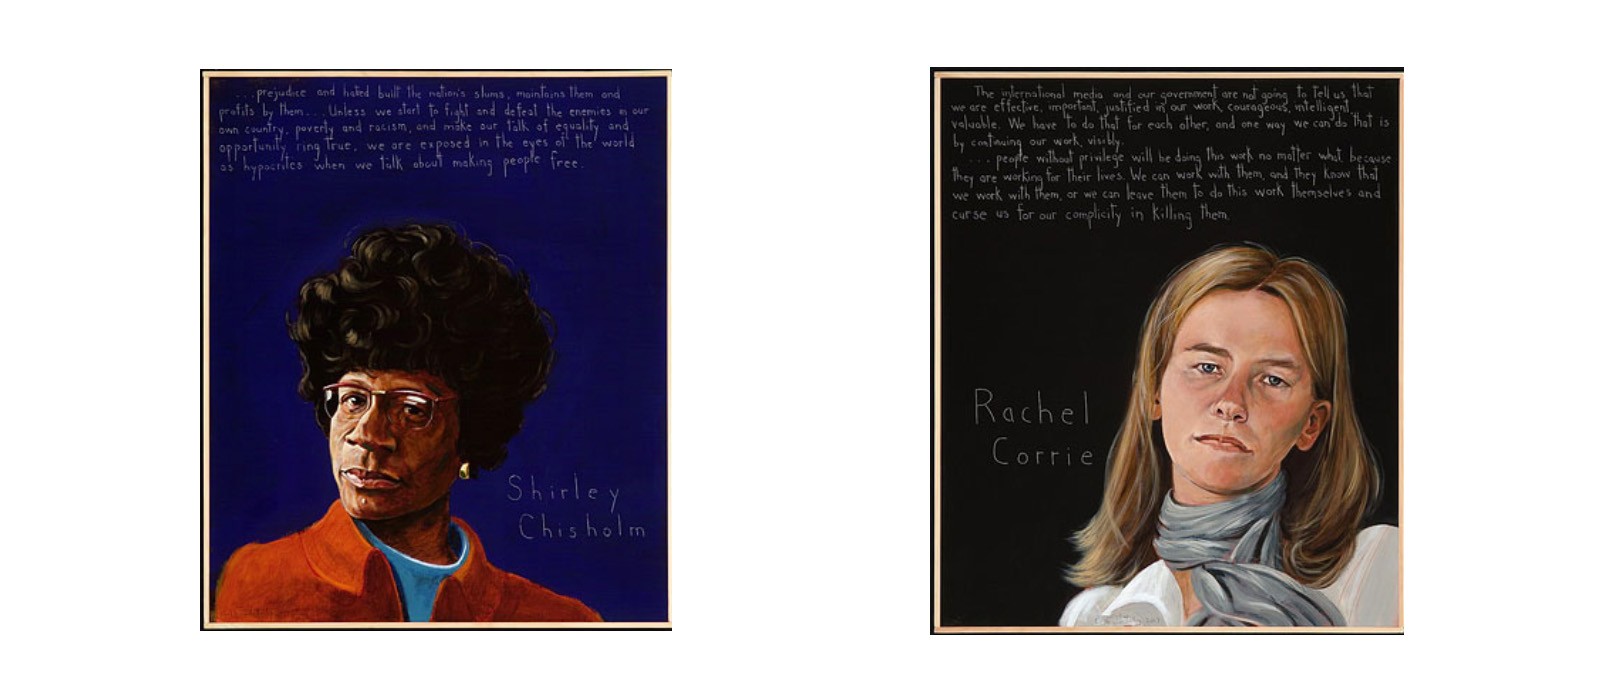 Paintings of Shirley Chisholm (left) and Rachel Corrie (right)